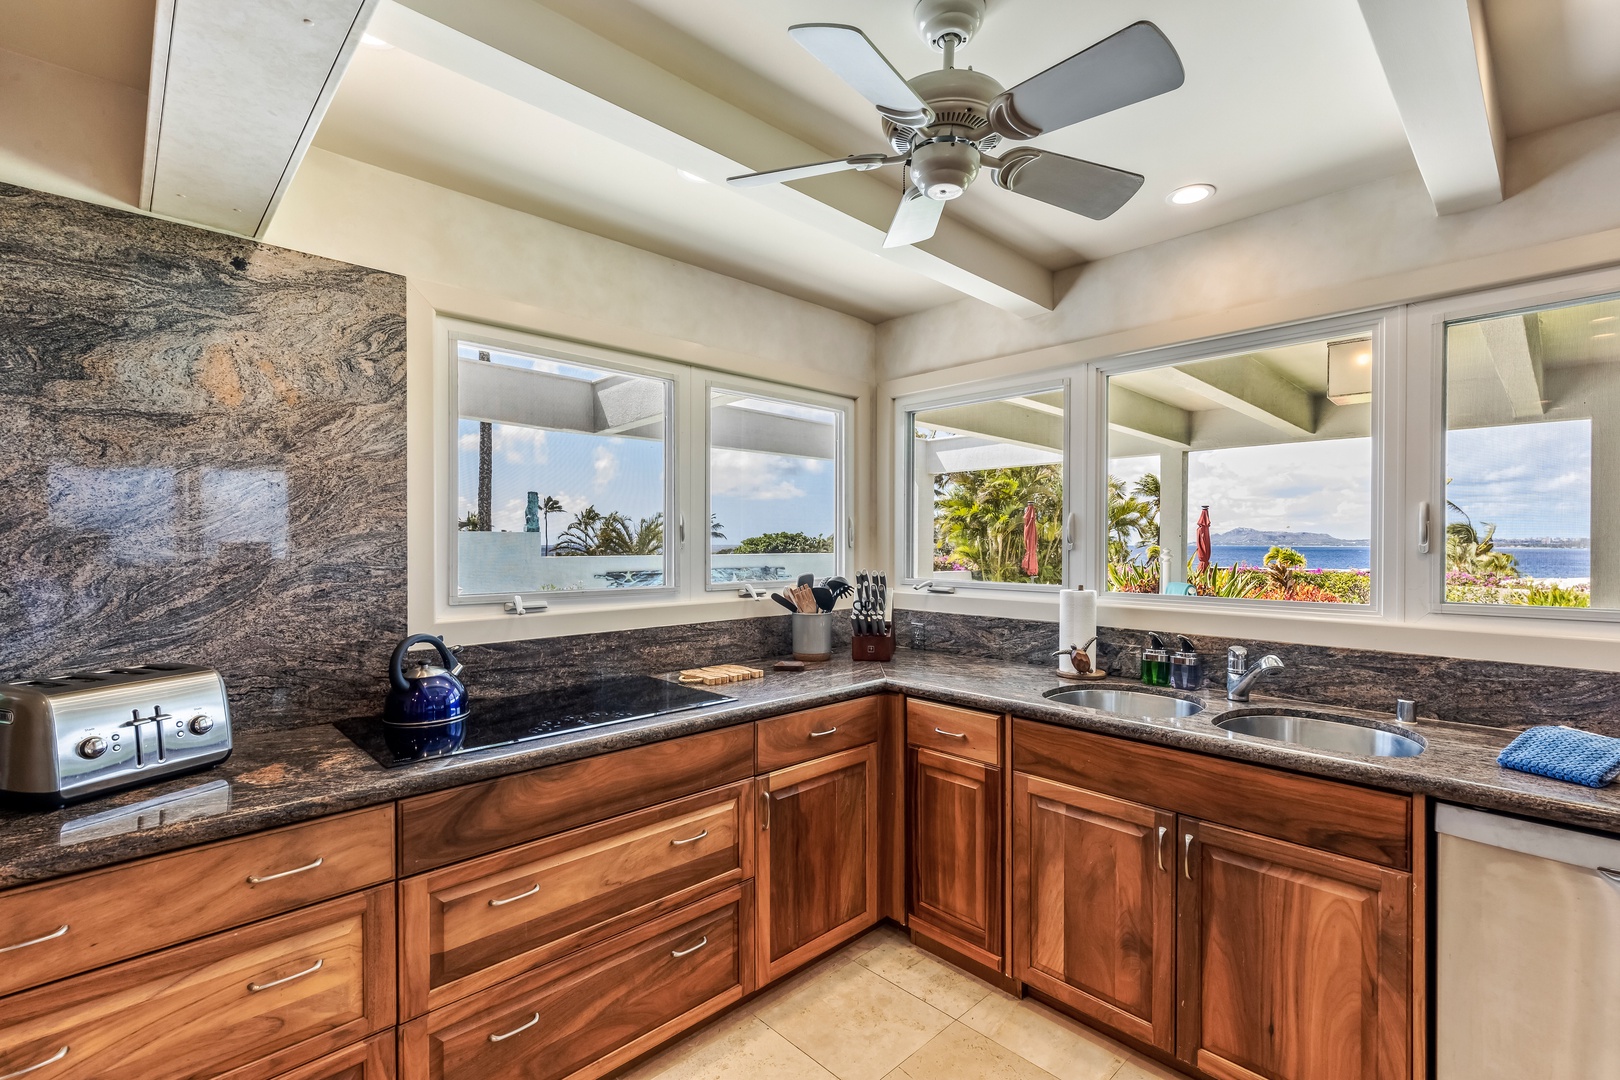 Honolulu Vacation Rentals, Hale Ola - Full complement of cookware, flatware, appliances, and accessories for even the most discriminating cooks